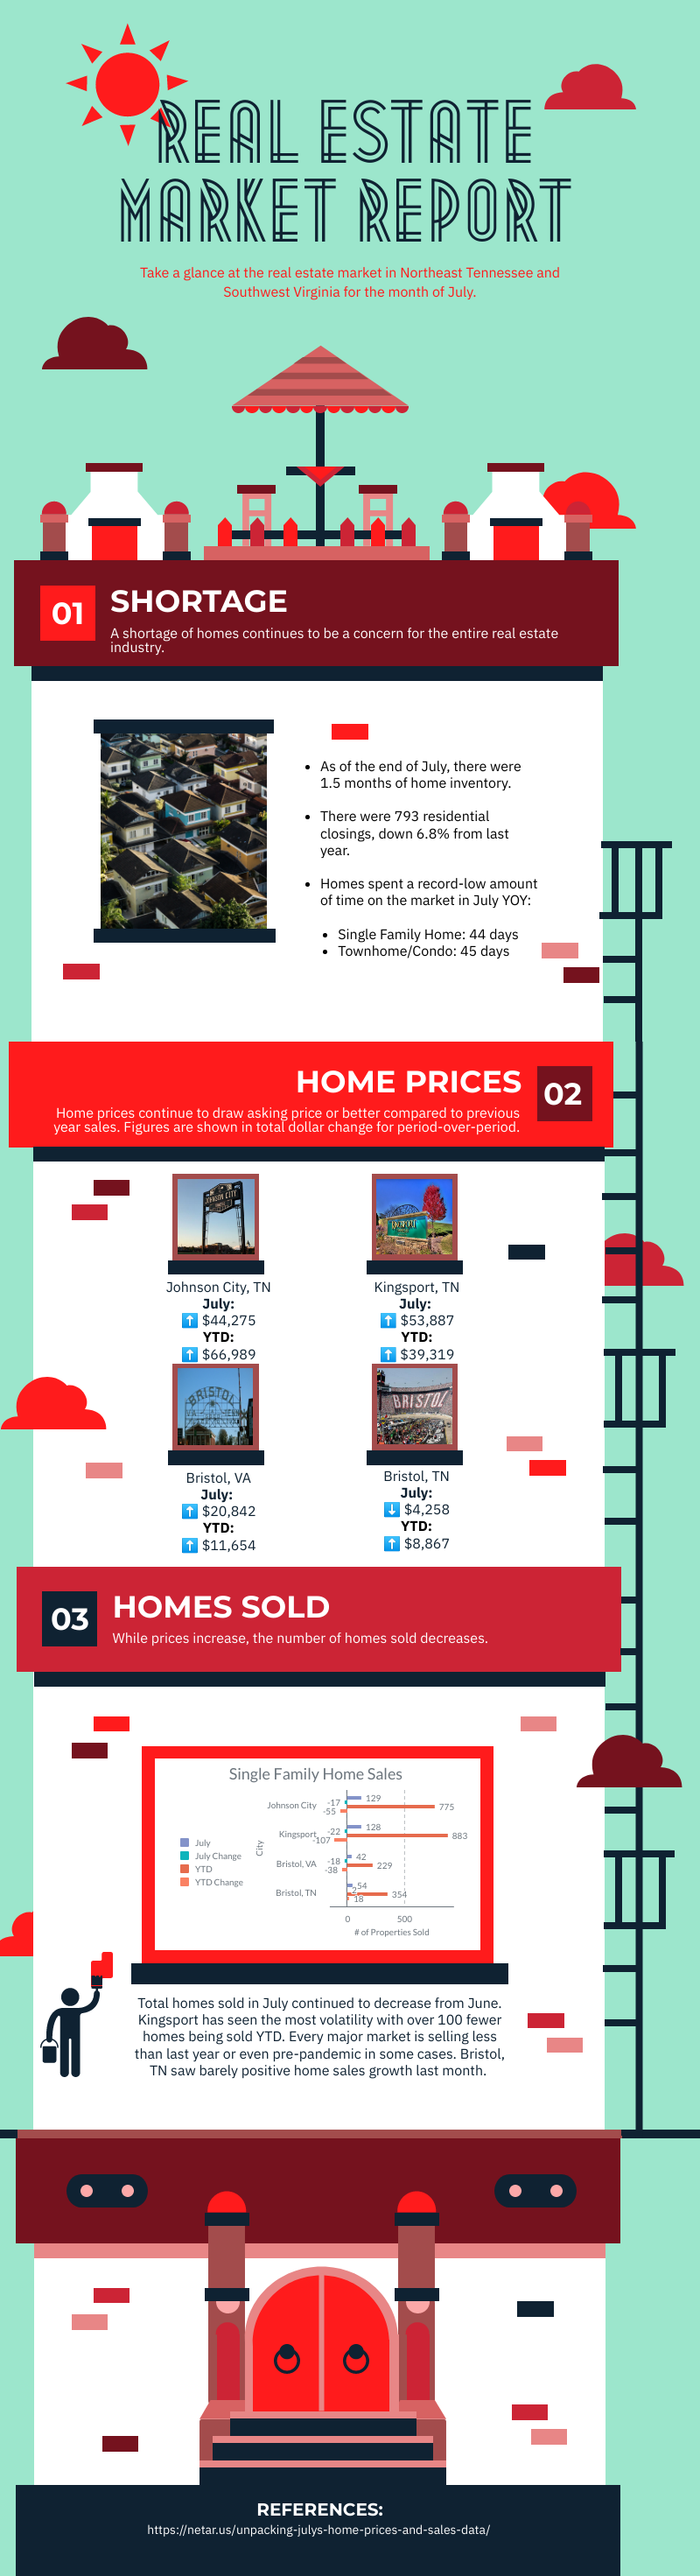 infographic, real estate, housing, graph